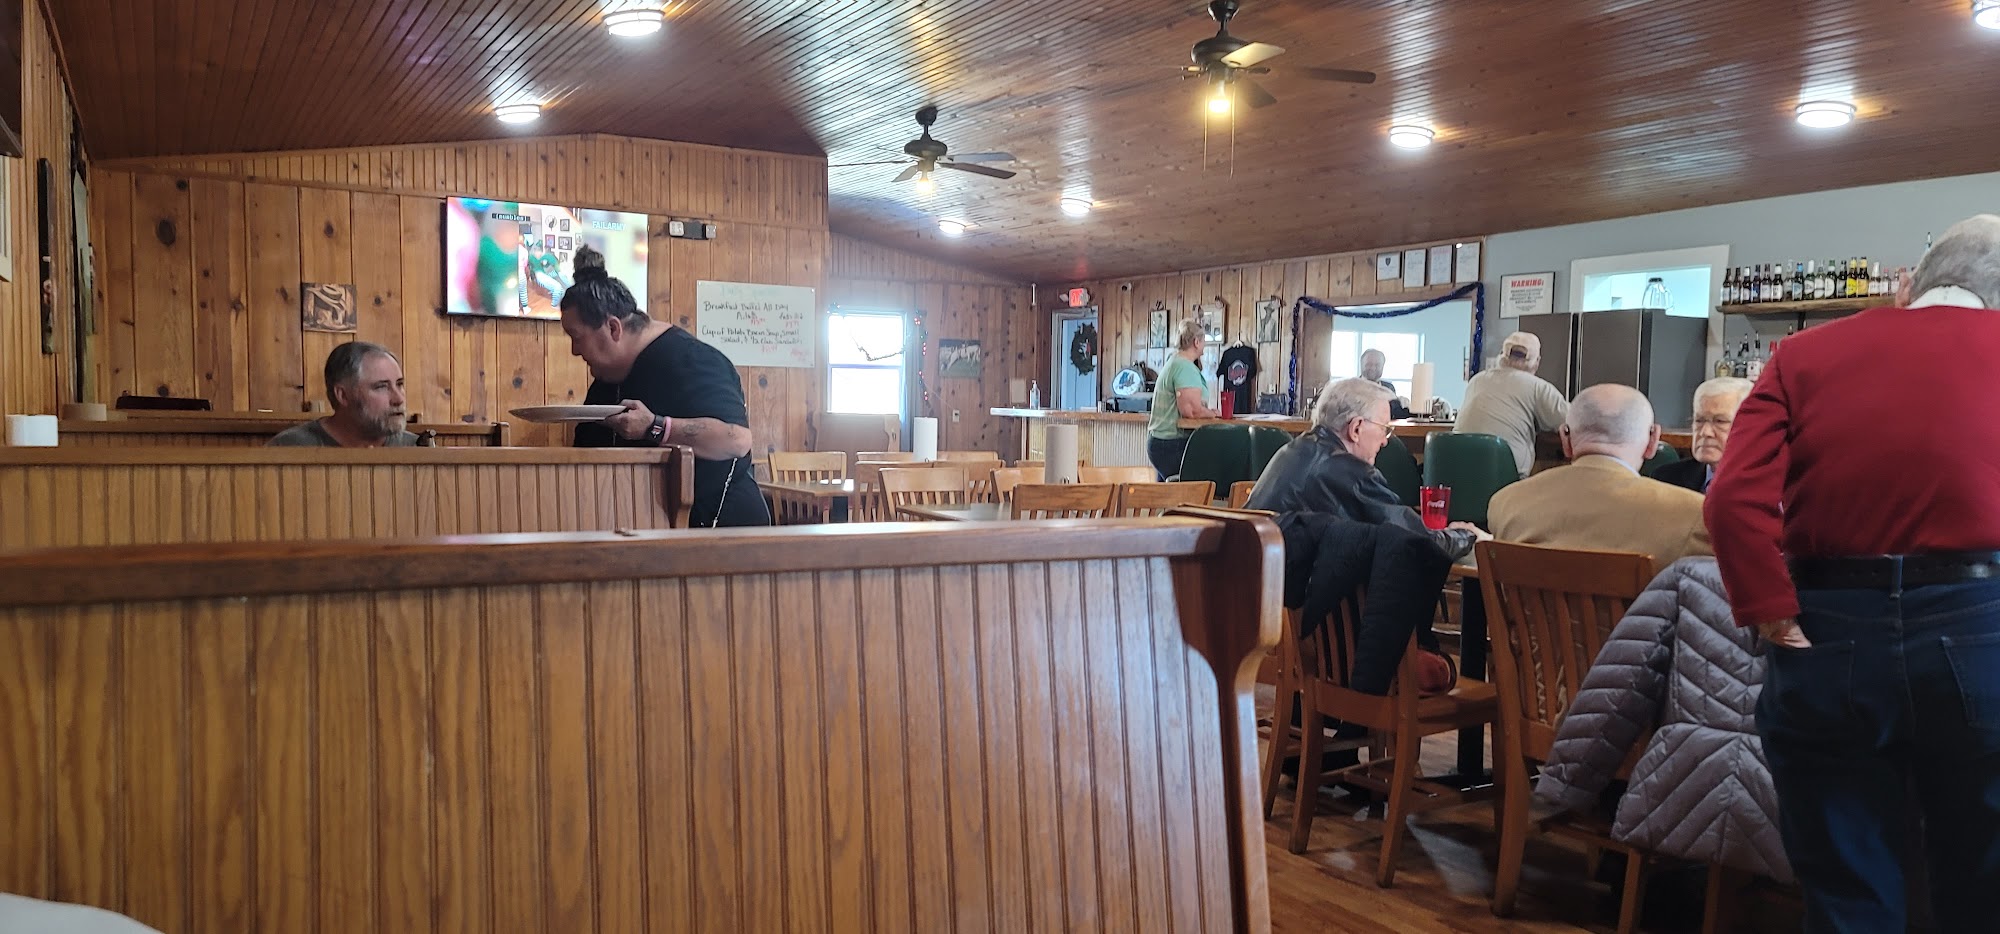 The Silver Spur Restaurant